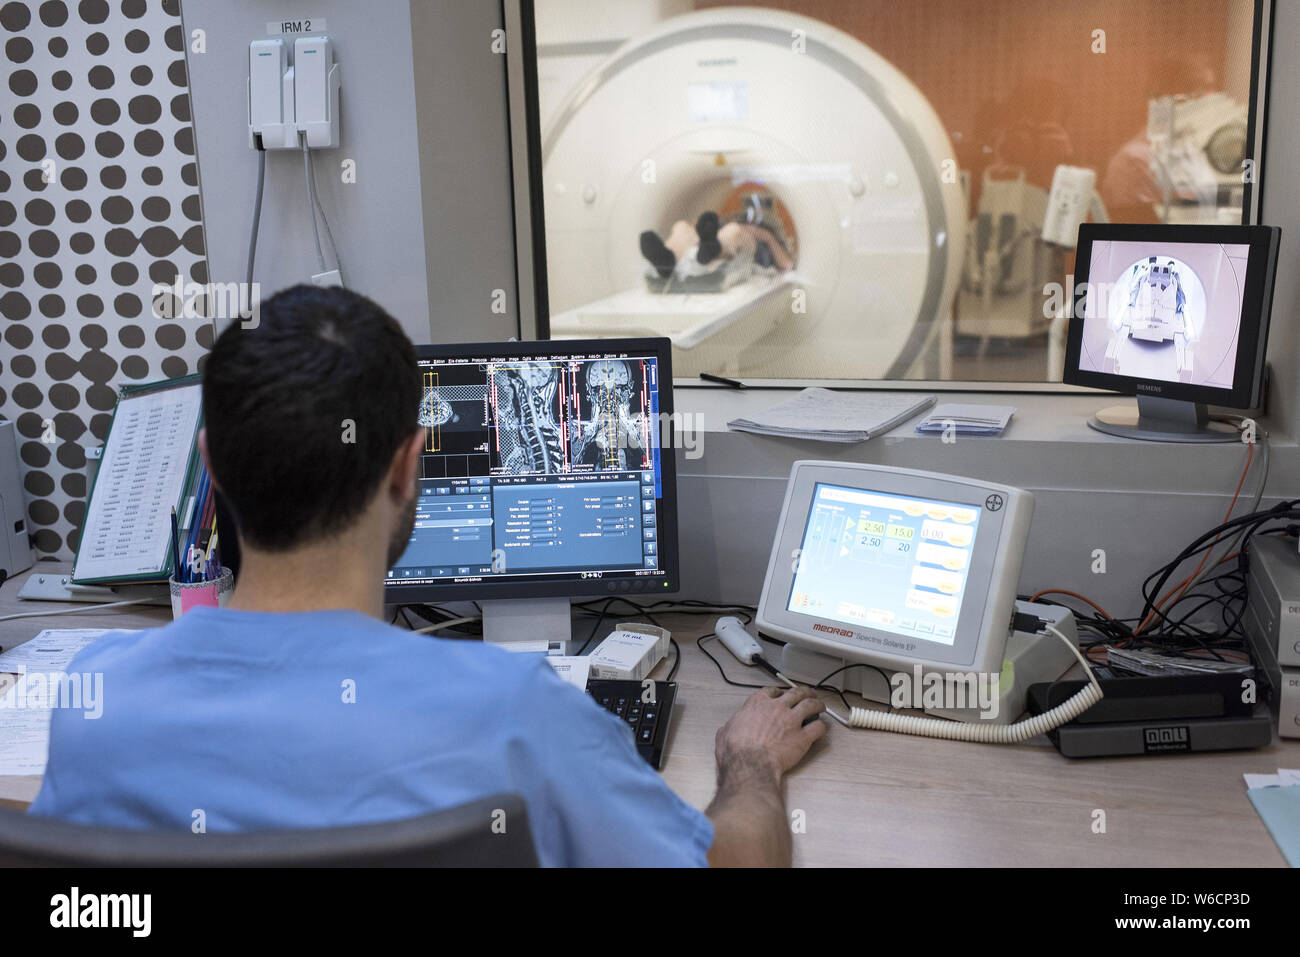 Clermont-Ferrand (central France). Radiology department at university hospital. Medical staff examining MRI images. Stock Photo